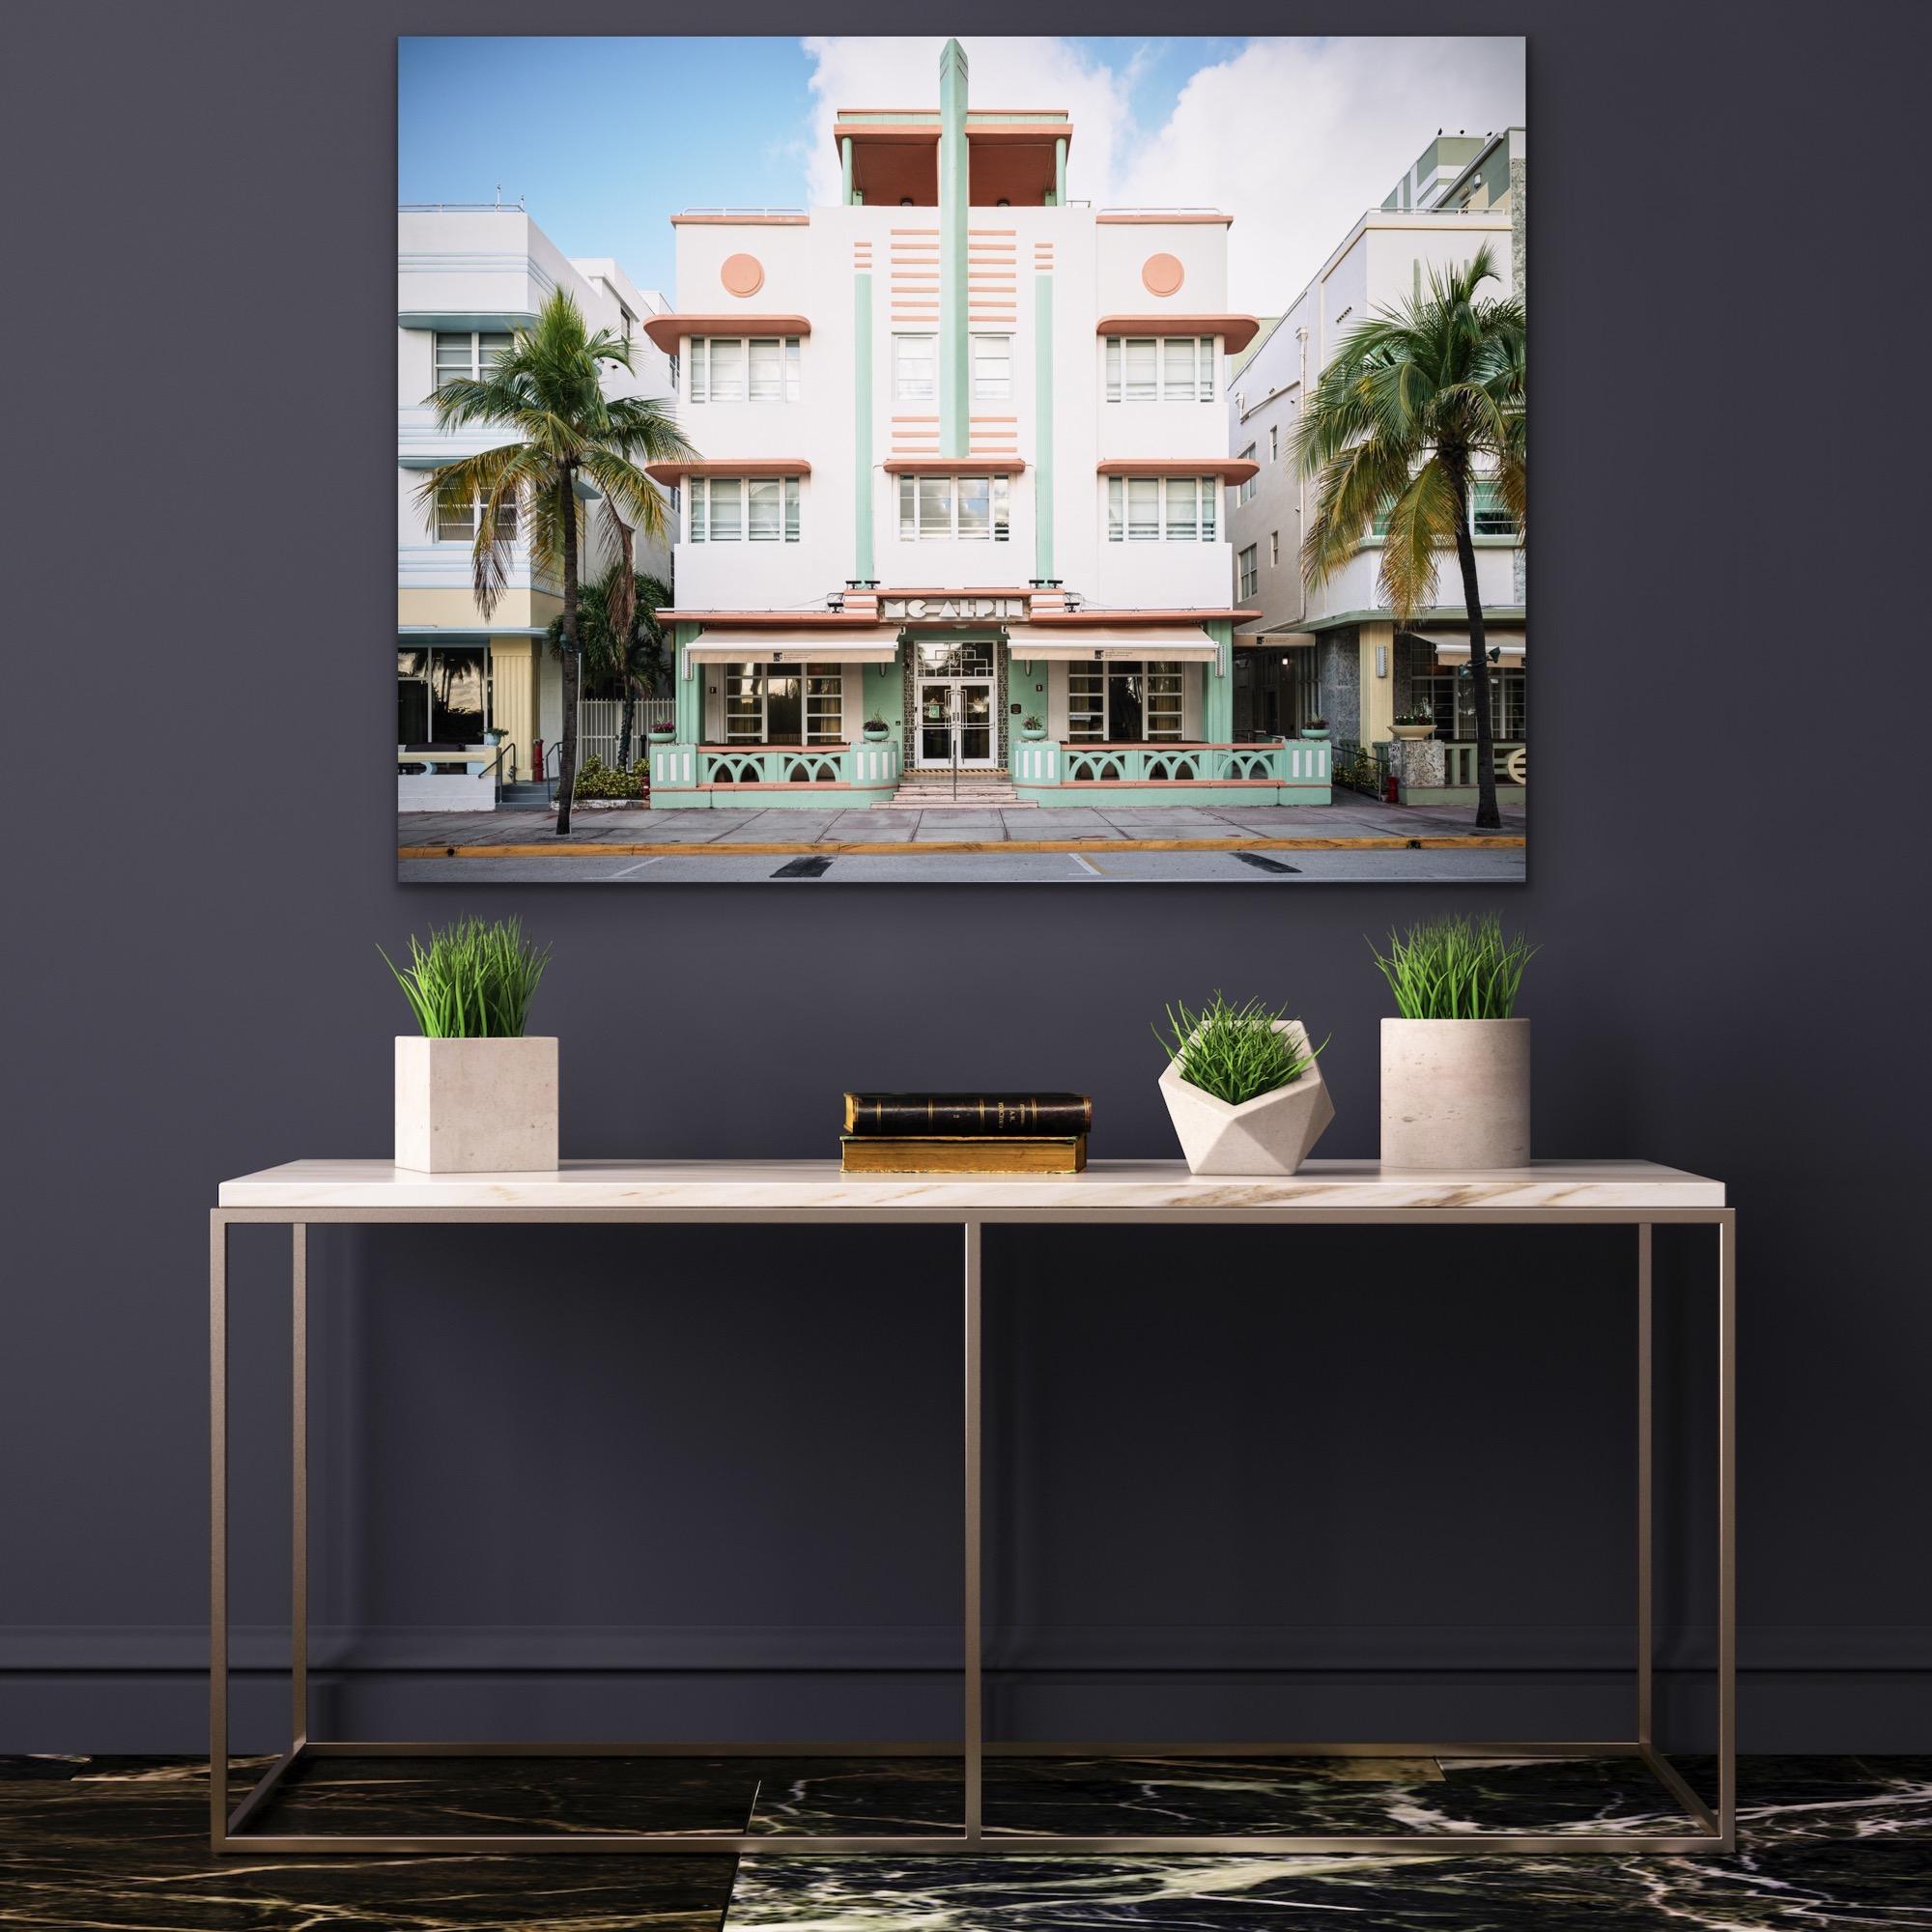 This contemporary urban photograph by Peter Mendelson captures the Deco style MC Alpin building in Miami Beach, Florida, with palm trees and neighboring Deco style buildings on either side. 

This is a metal sublimation print. The frame on an